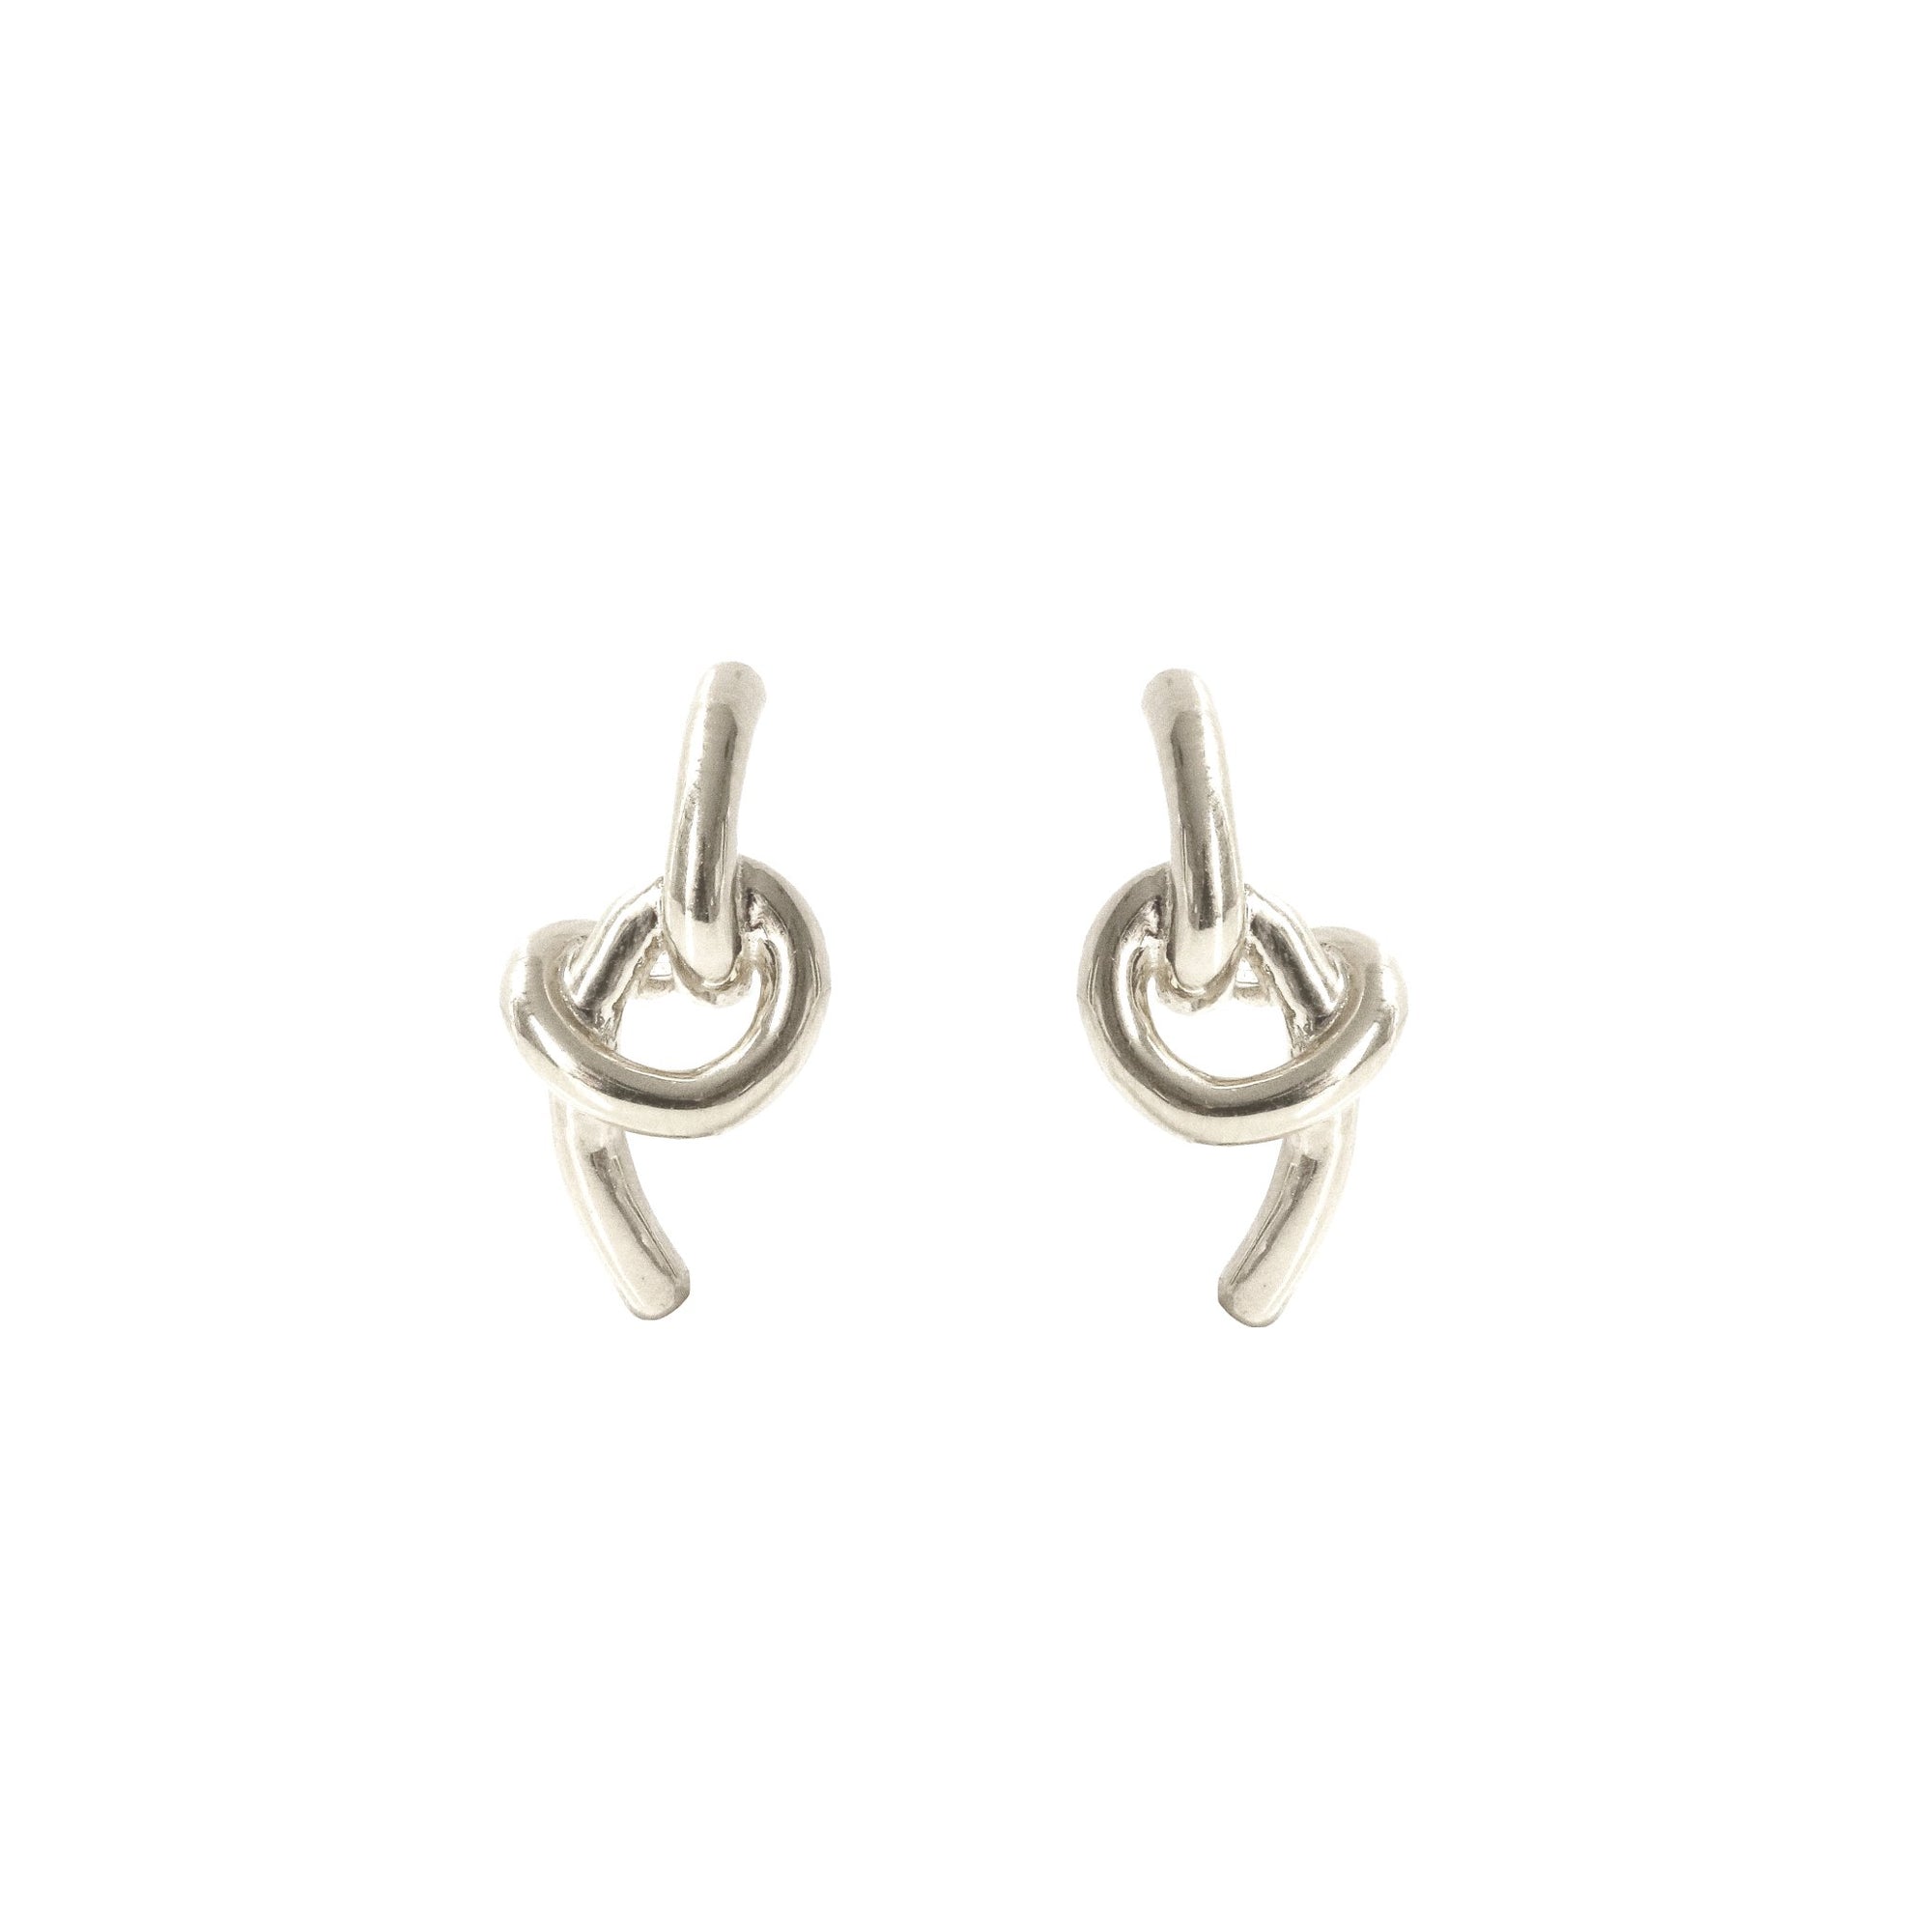 POISE KNOT STUDS - SILVER - SO PRETTY CARA COTTER